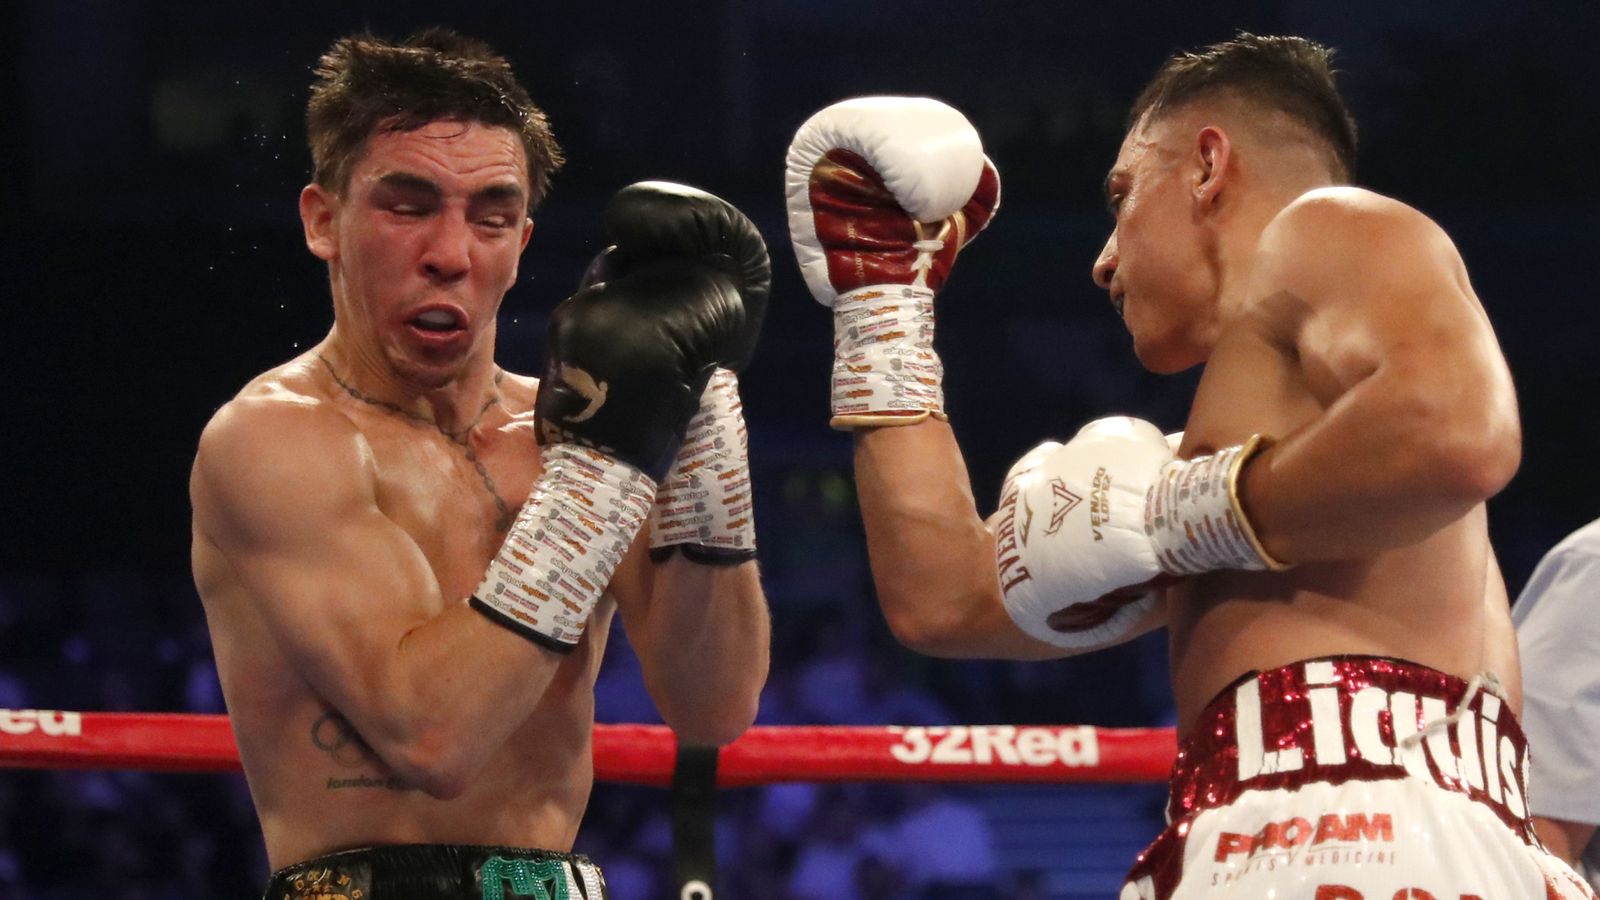 Michael Conlan's IBF world title hopes crushed by defeat to Luis Alberto Lopez in Belfast